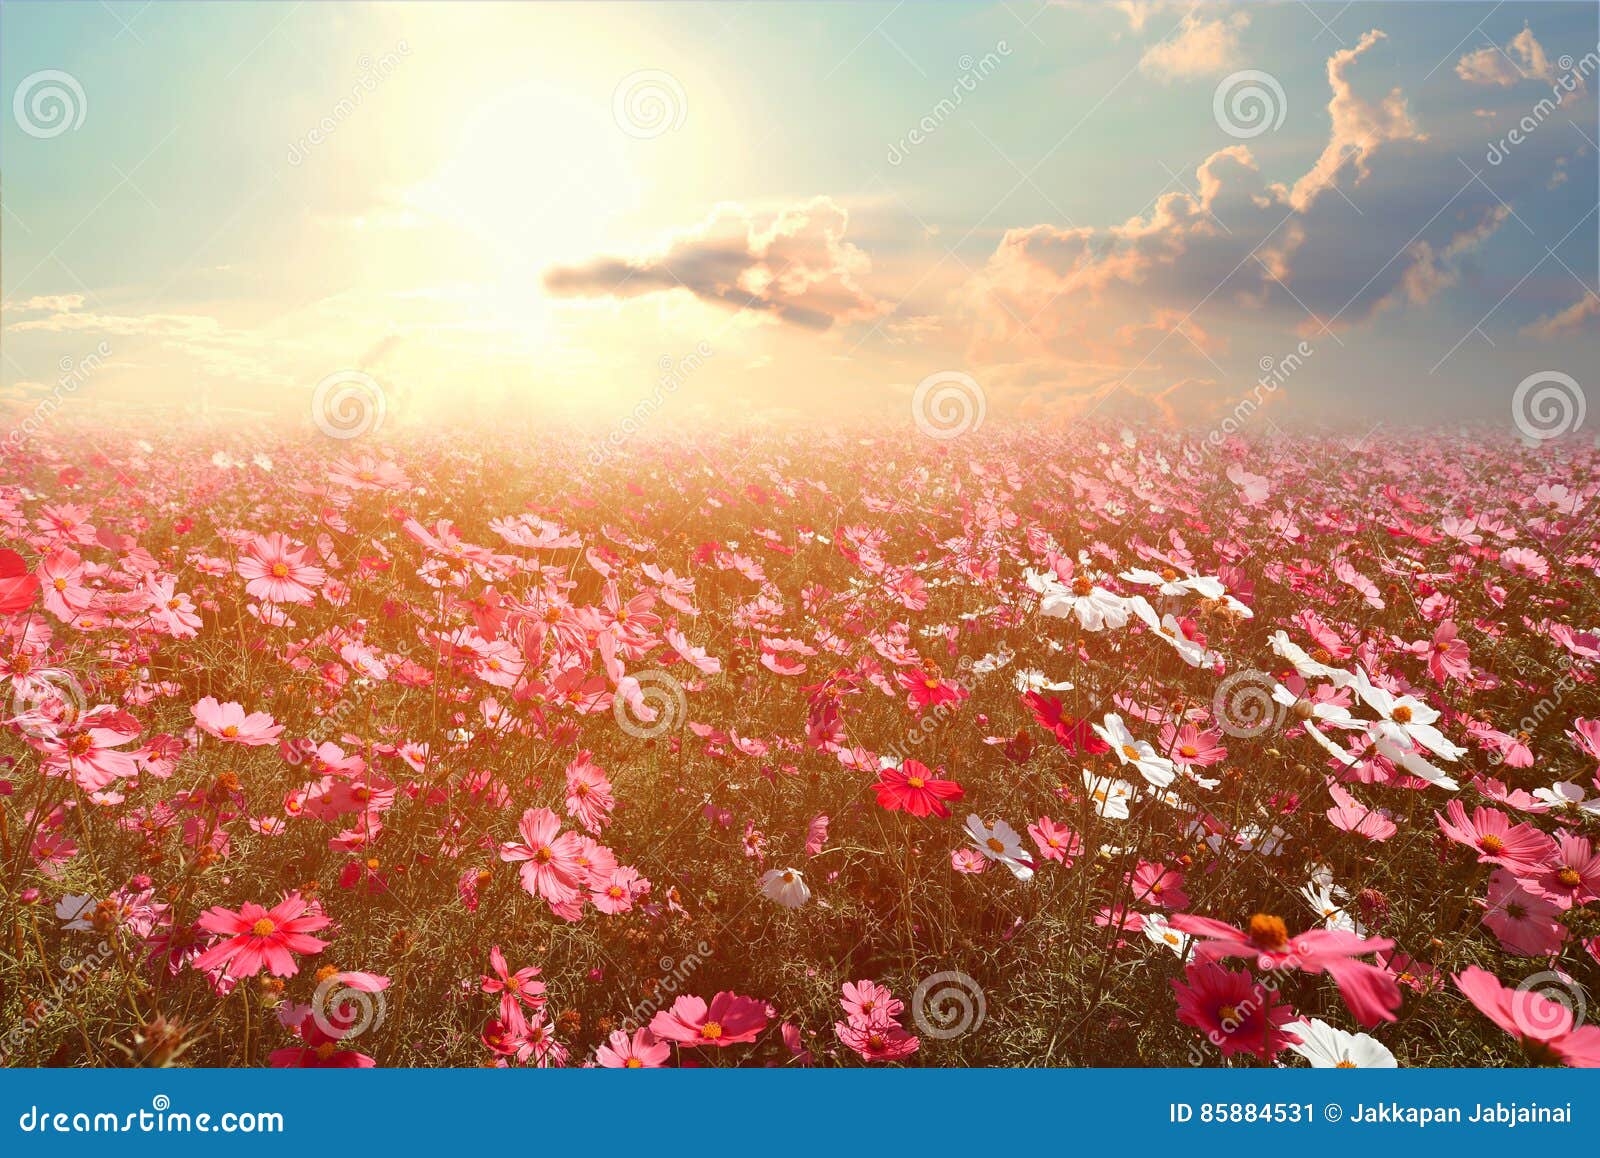 beautiful pink and red cosmos flower field with sunshine